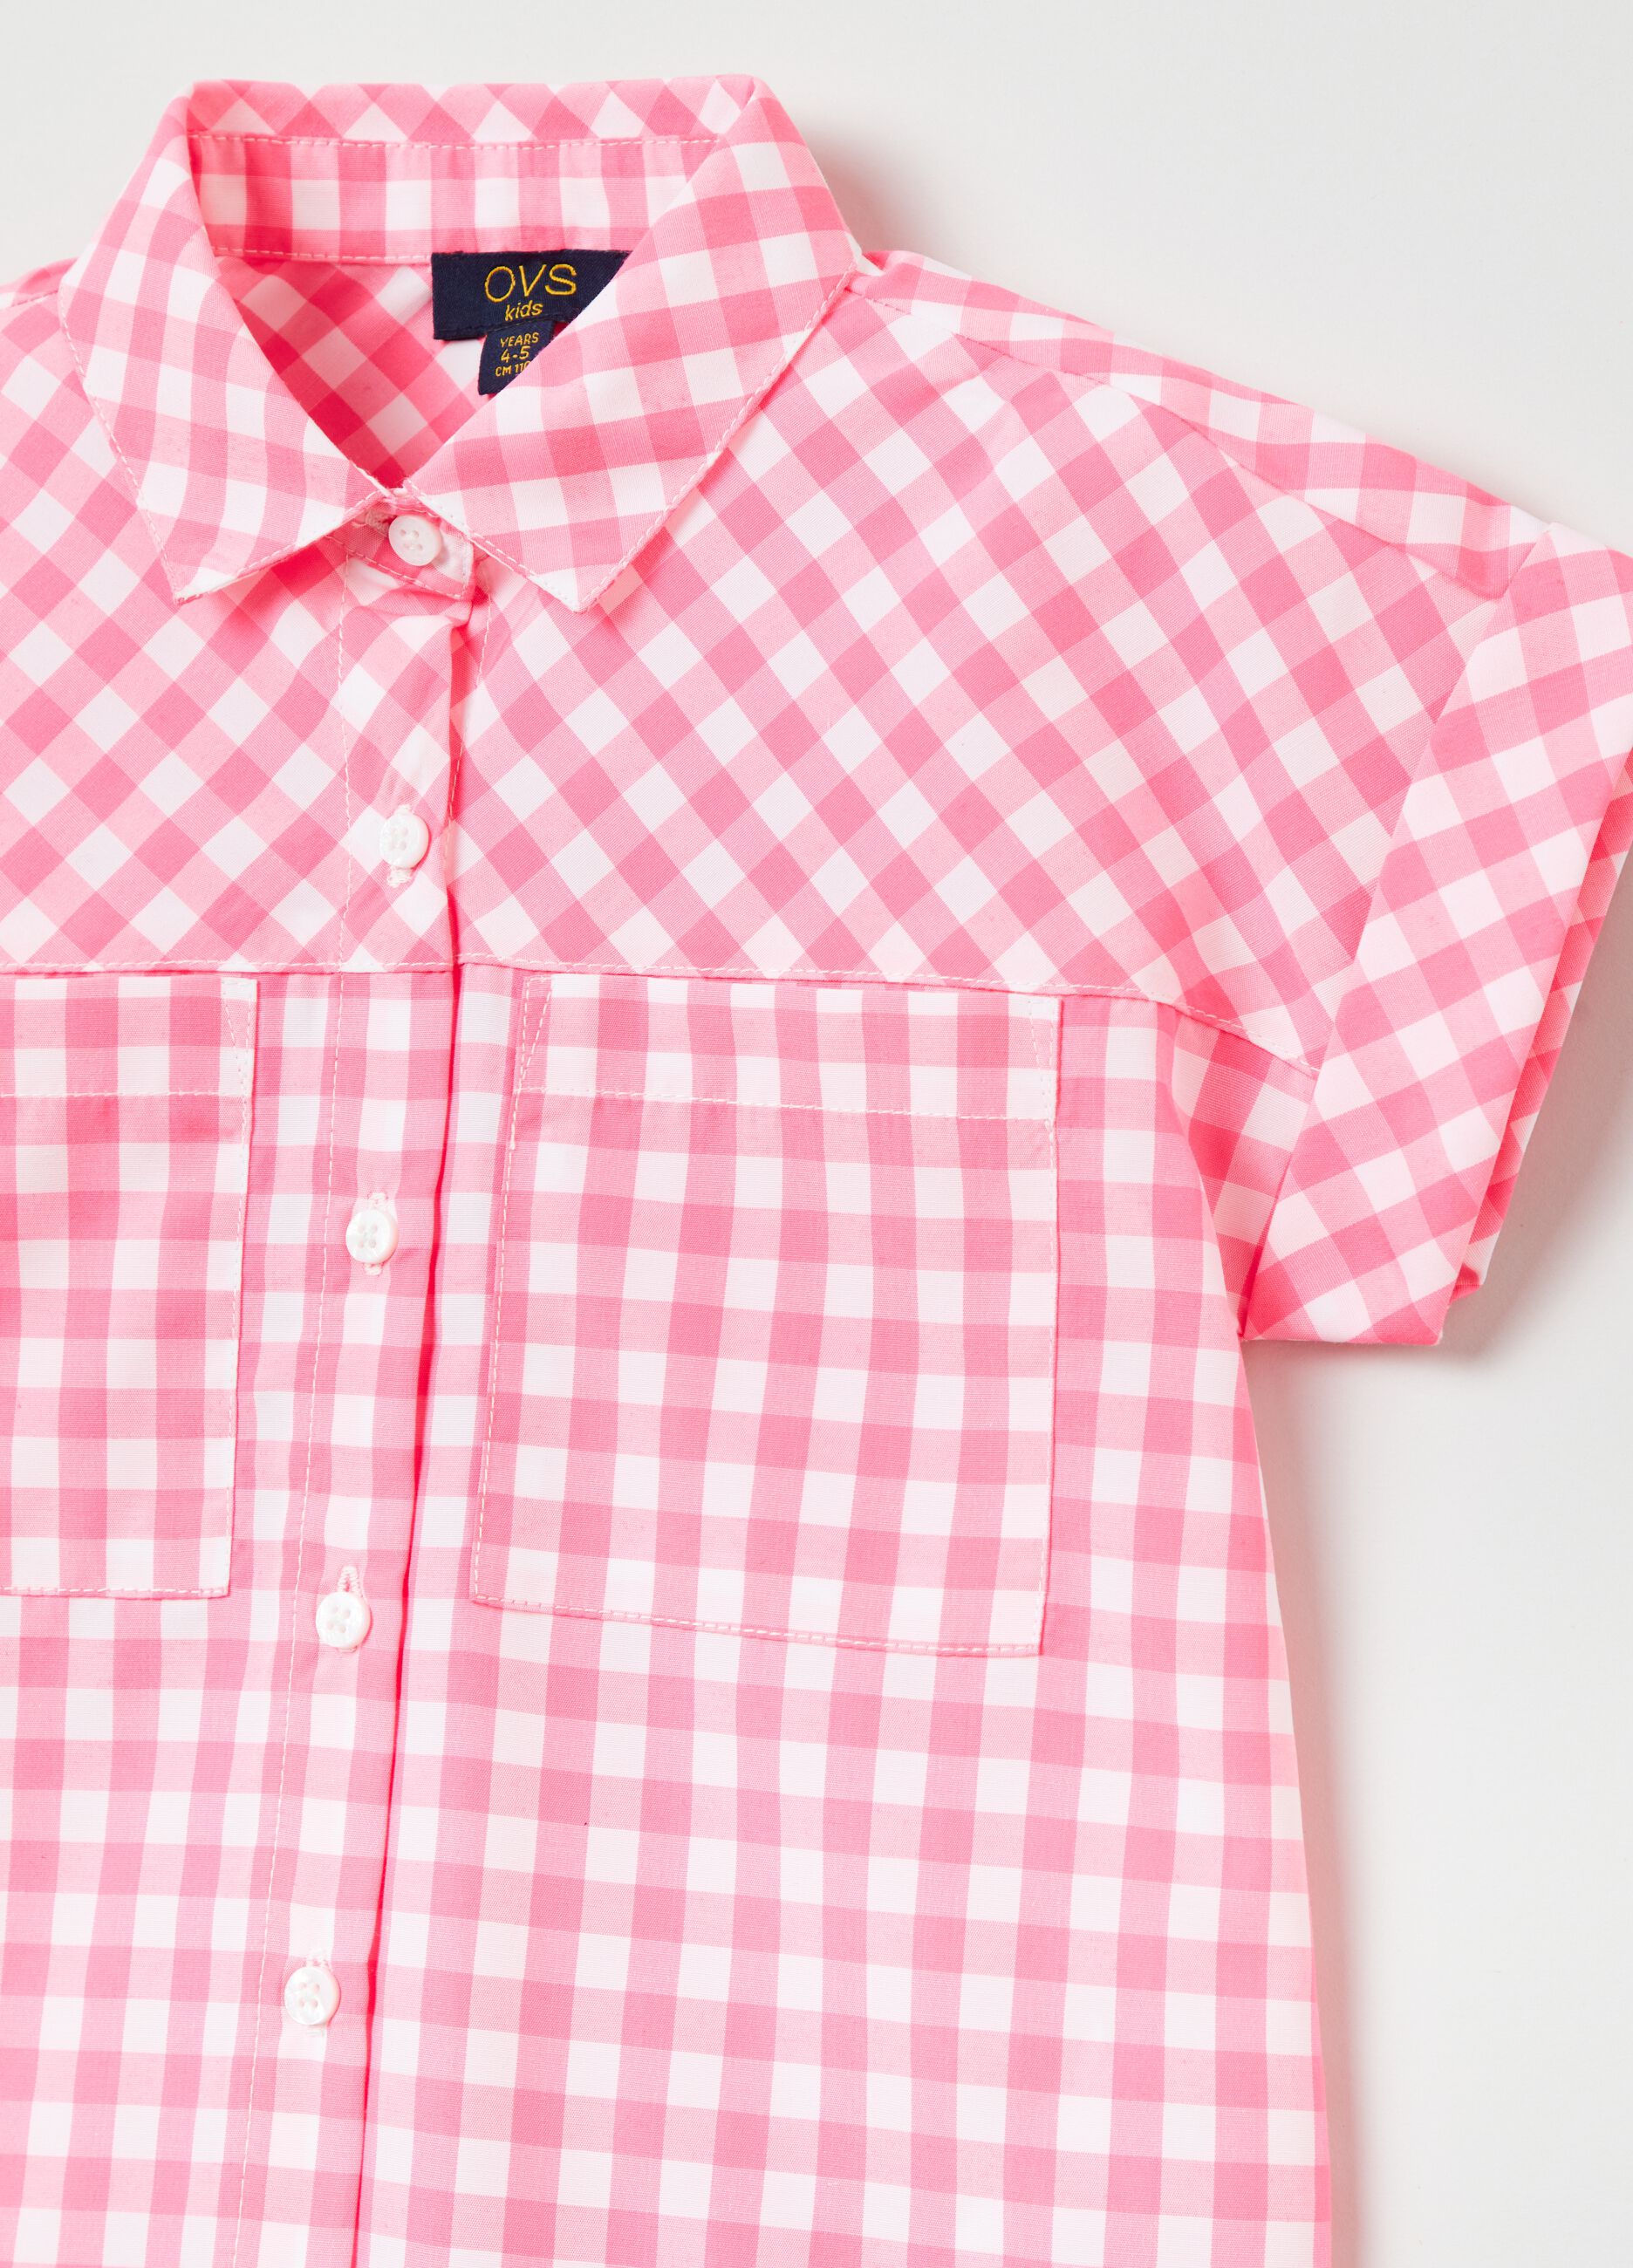 Short-sleeved shirt with gingham pattern